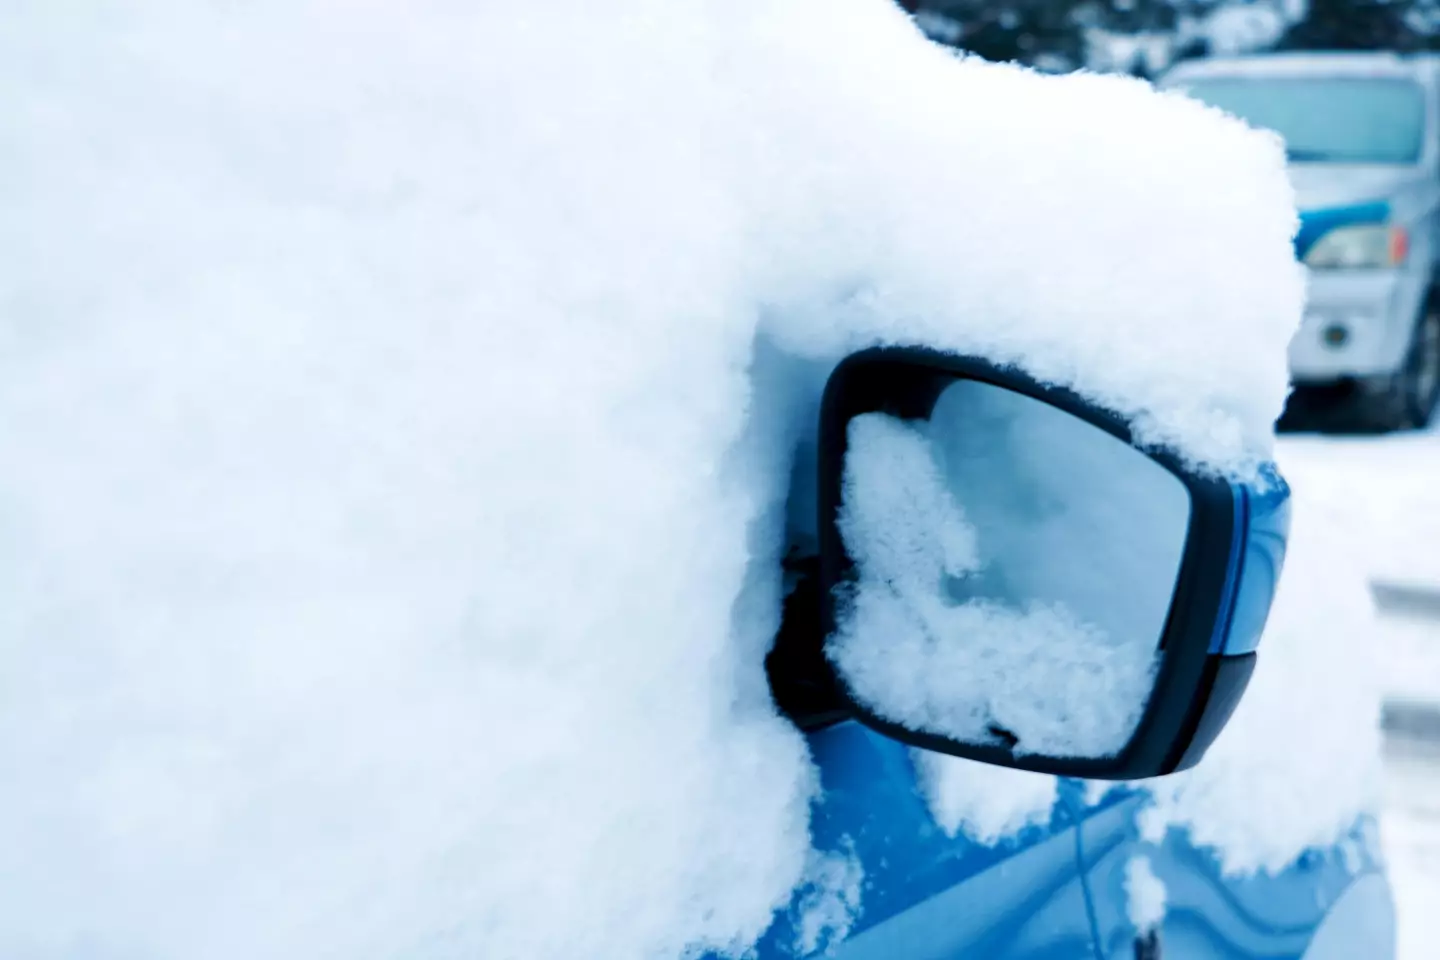 You will want to remove the snow off your car before you get going.